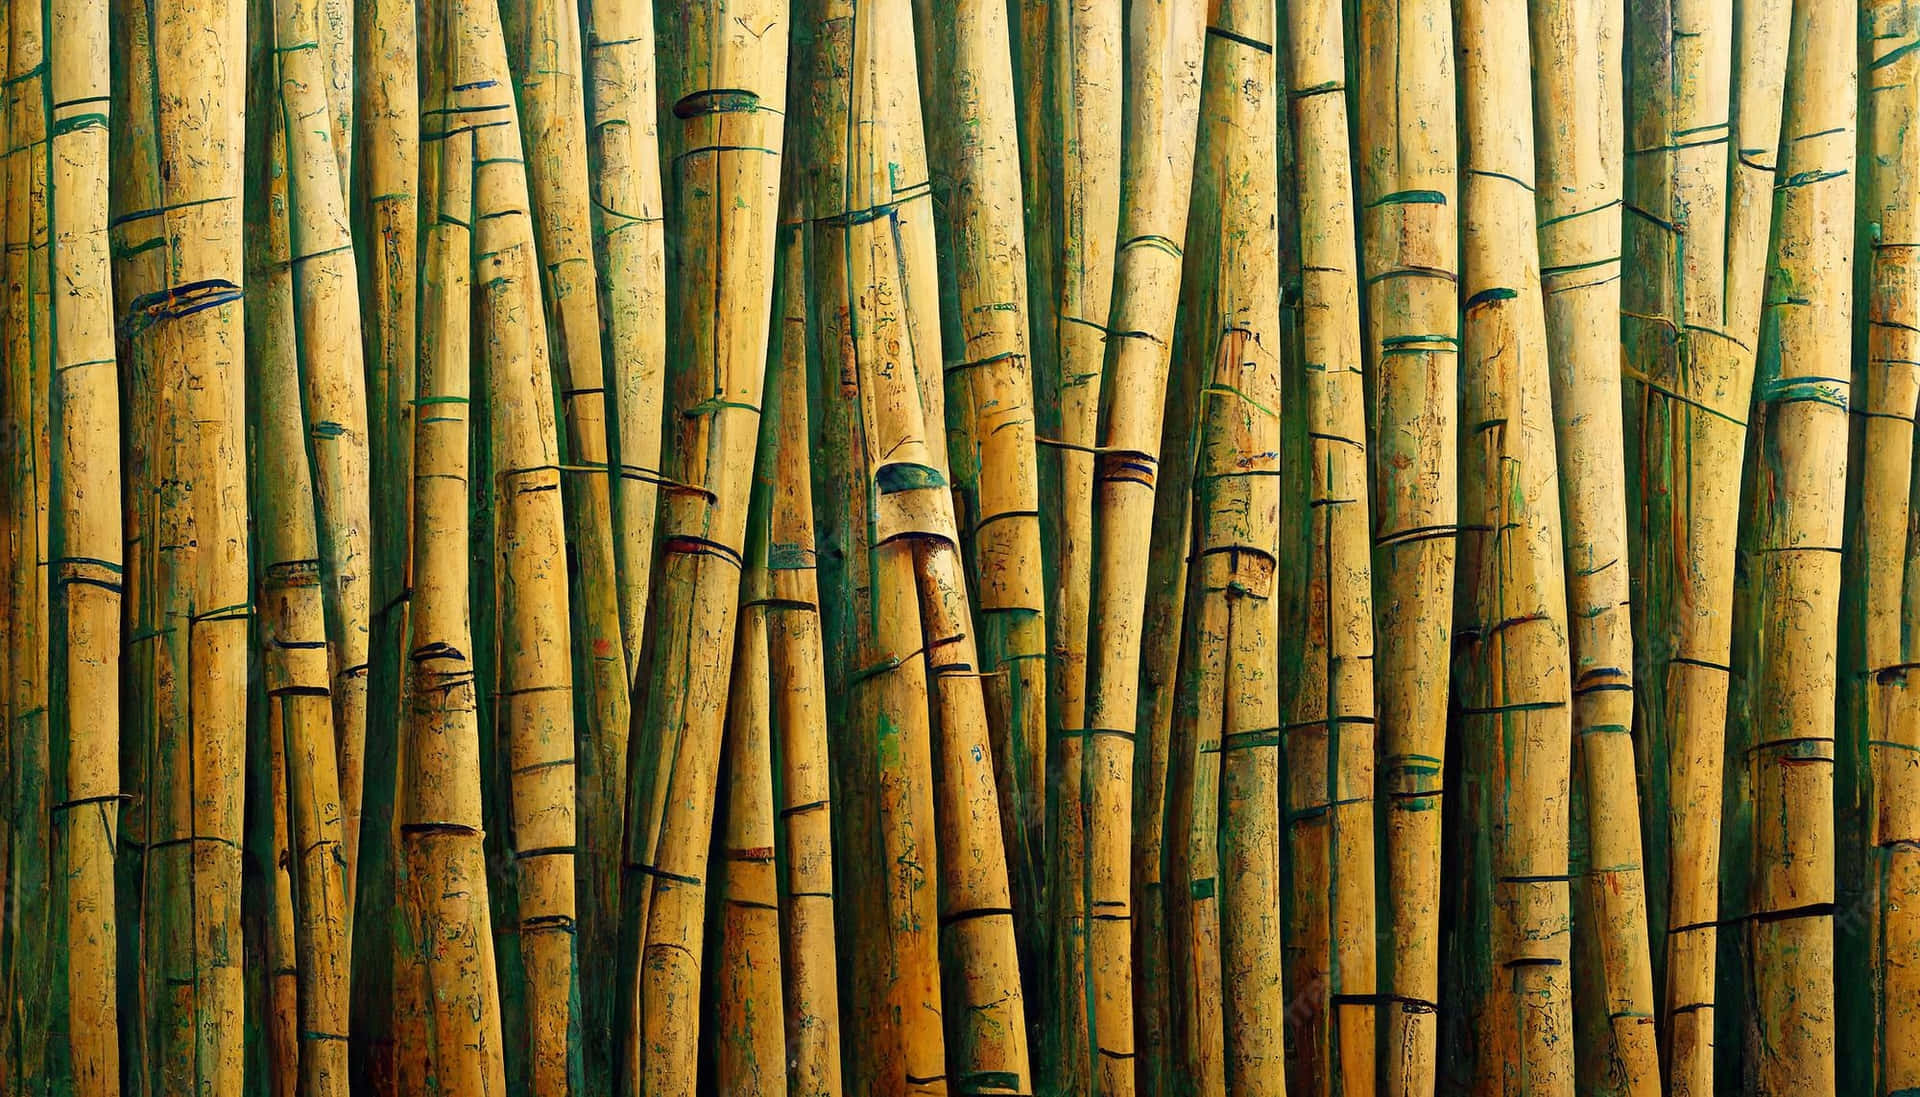 Peaceful And Serene View Of A Bamboo Forest Background